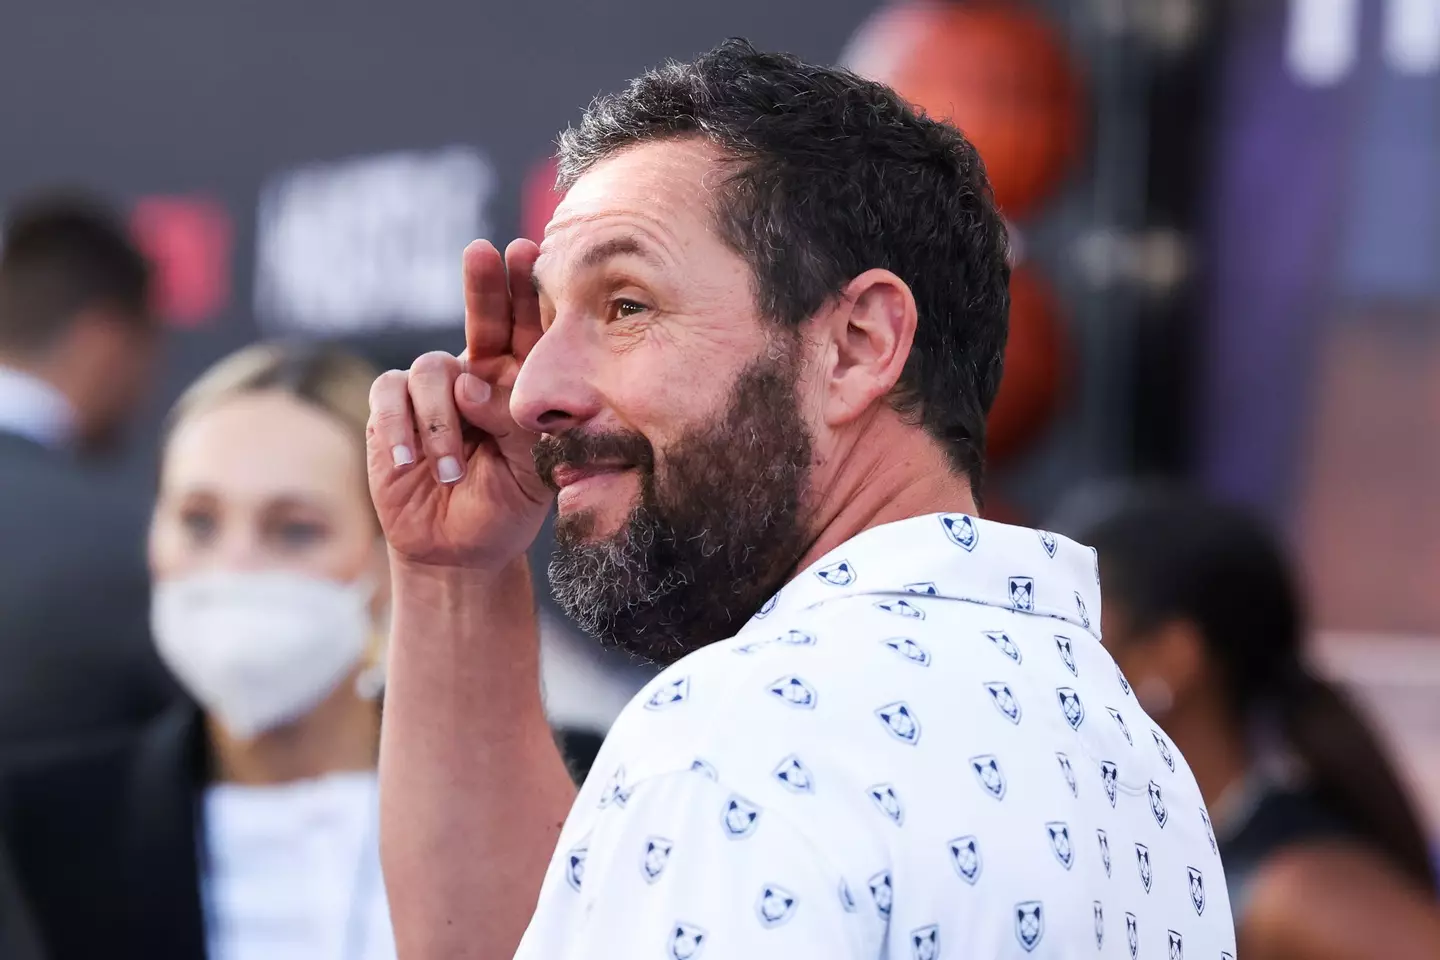 Adam Sandler delivered the speech of a lifetime with the help of his daughters.